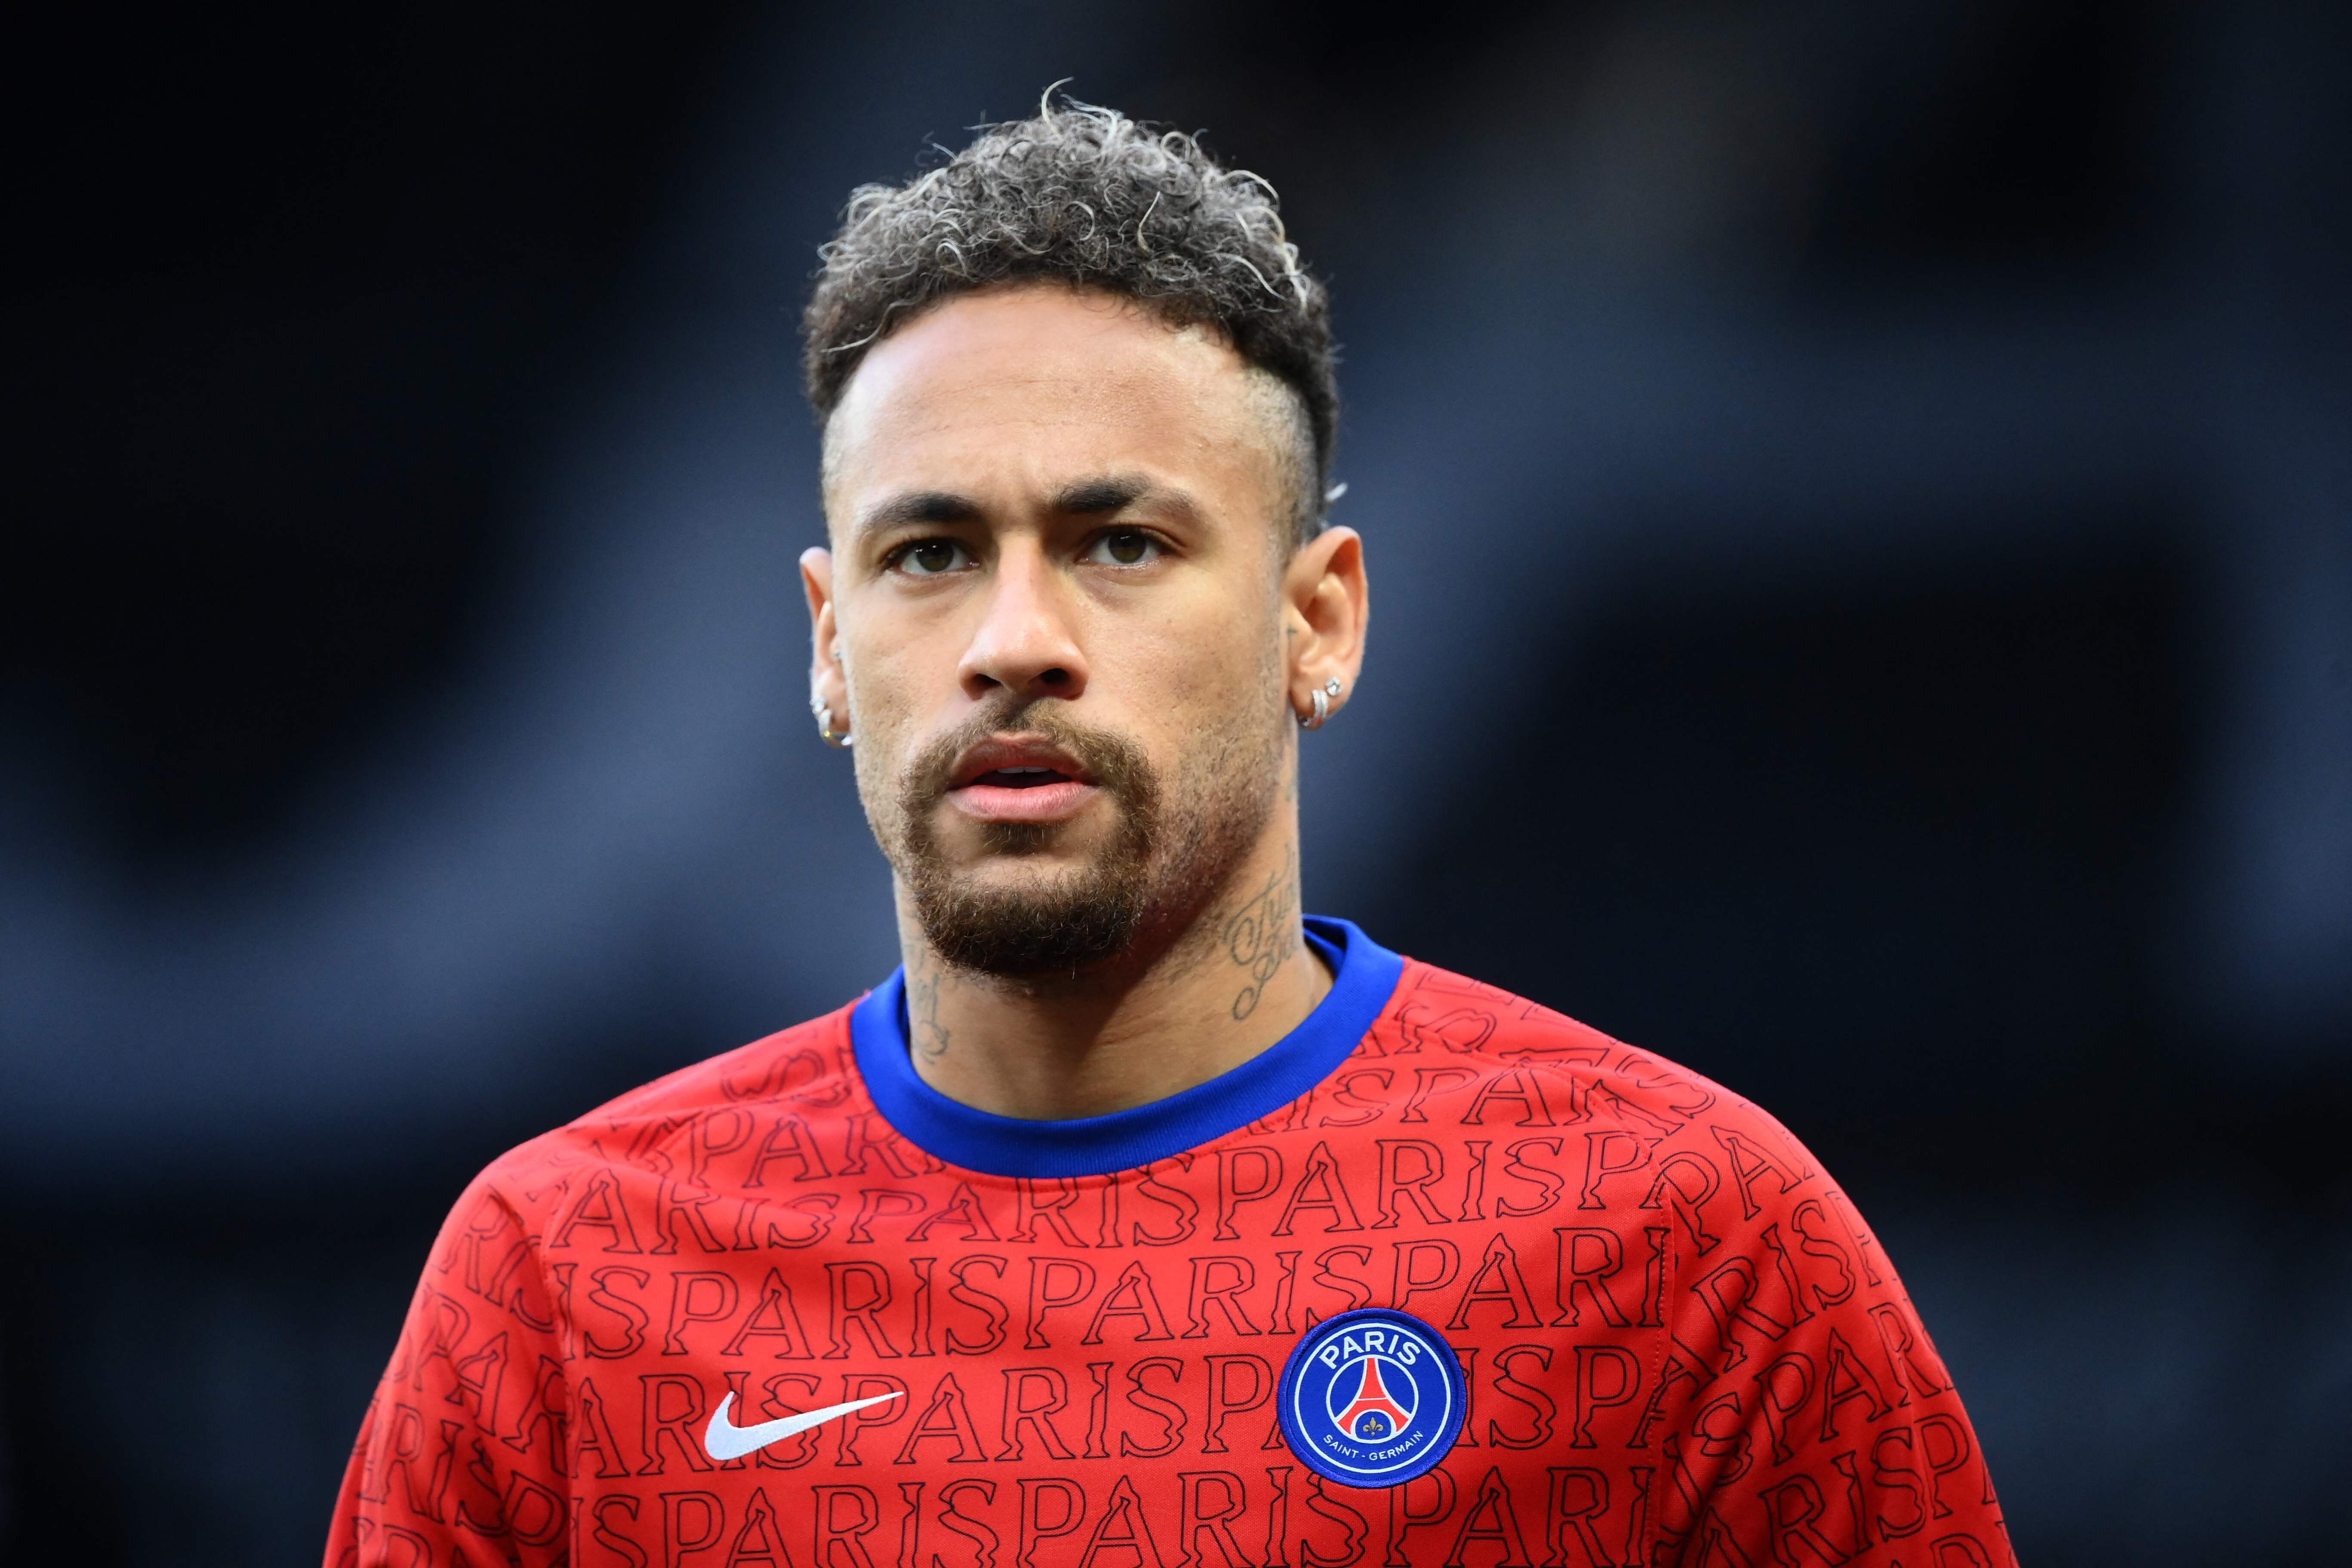 Nike says Neymar ‘refused to cooperate in a good faith’ as the company investigated an employee’s claim that he sexually assaulted her. Photo: AFP